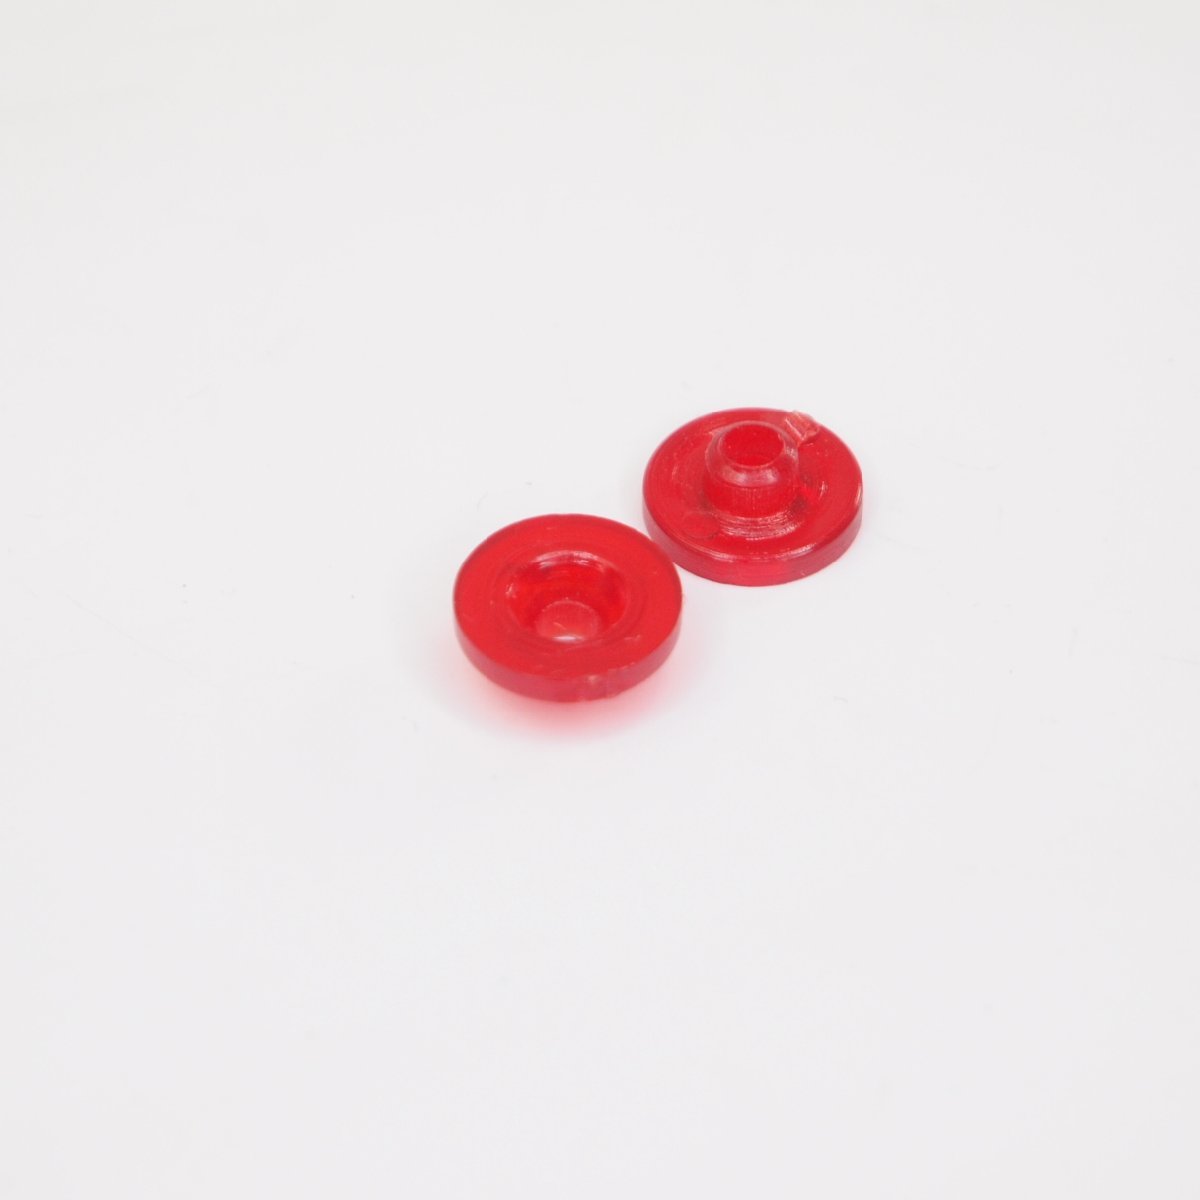 Insulating washers rear light contacts PASCOLI for Vespa VM2T VN1-2T ?VNA VL1-3T VB1T VS1-5 VBA ベスパ テール ワッシャー カラー_画像2